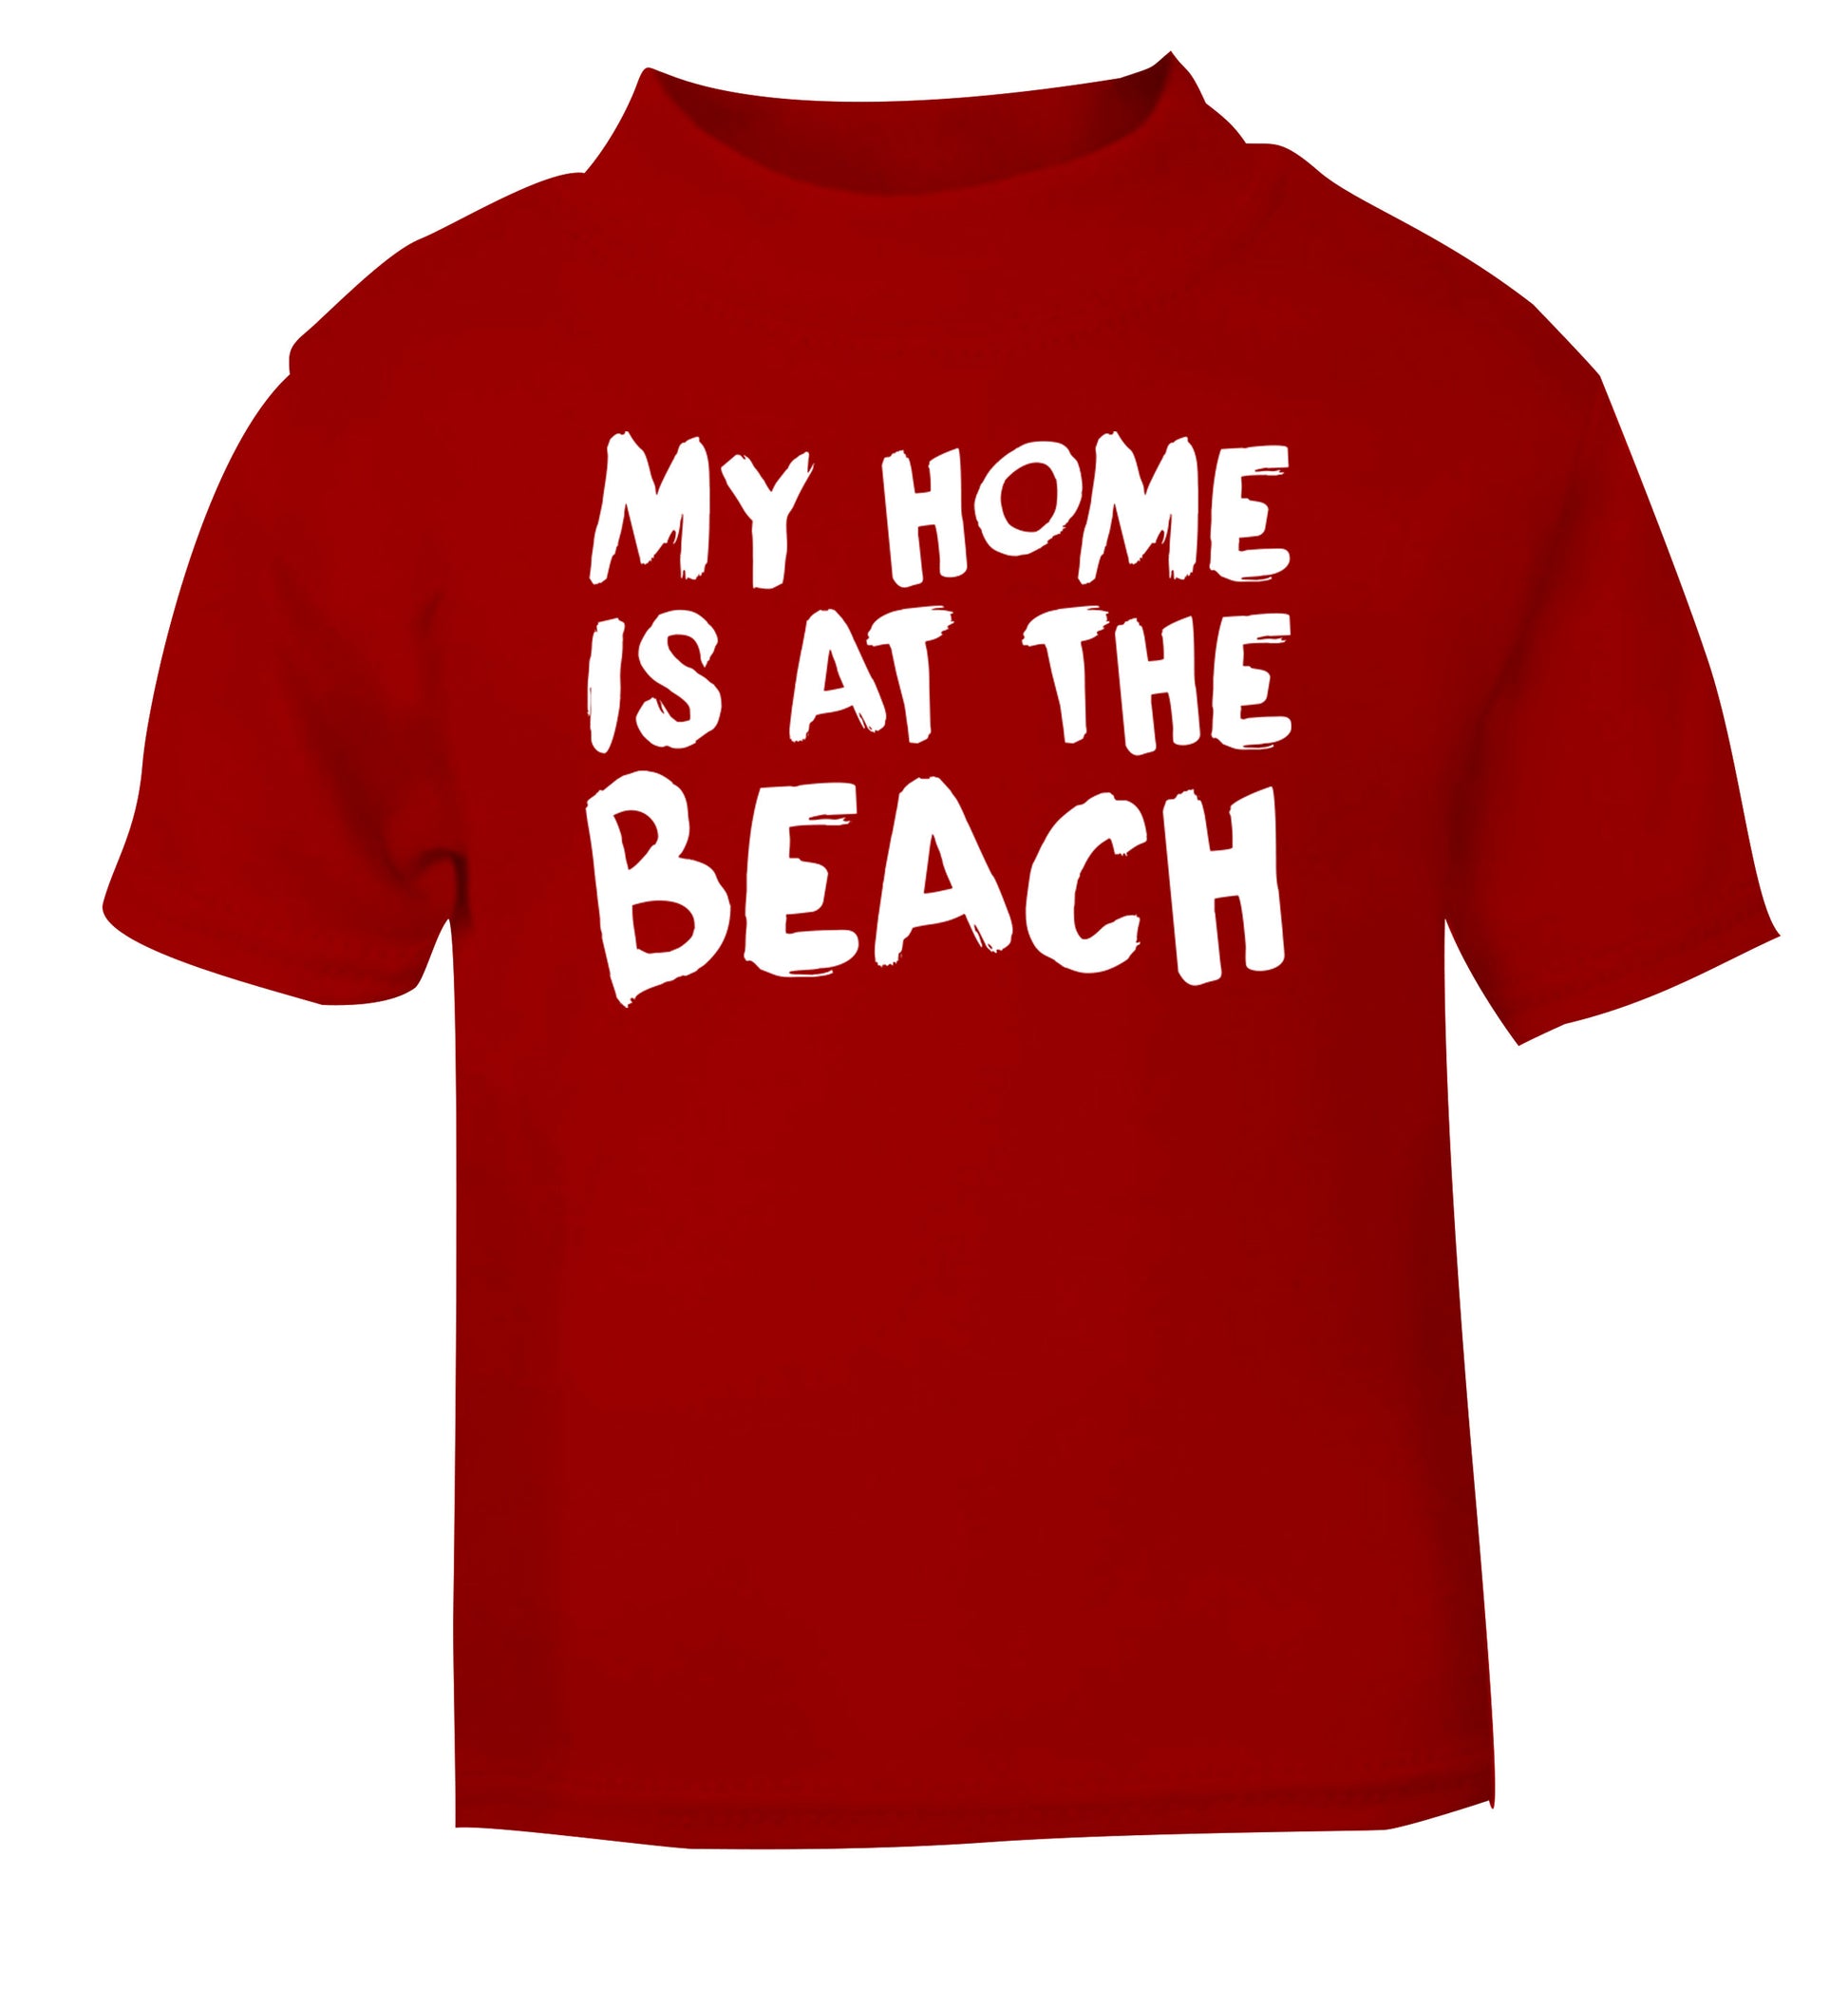 My home is at the beach red Baby Toddler Tshirt 2 Years